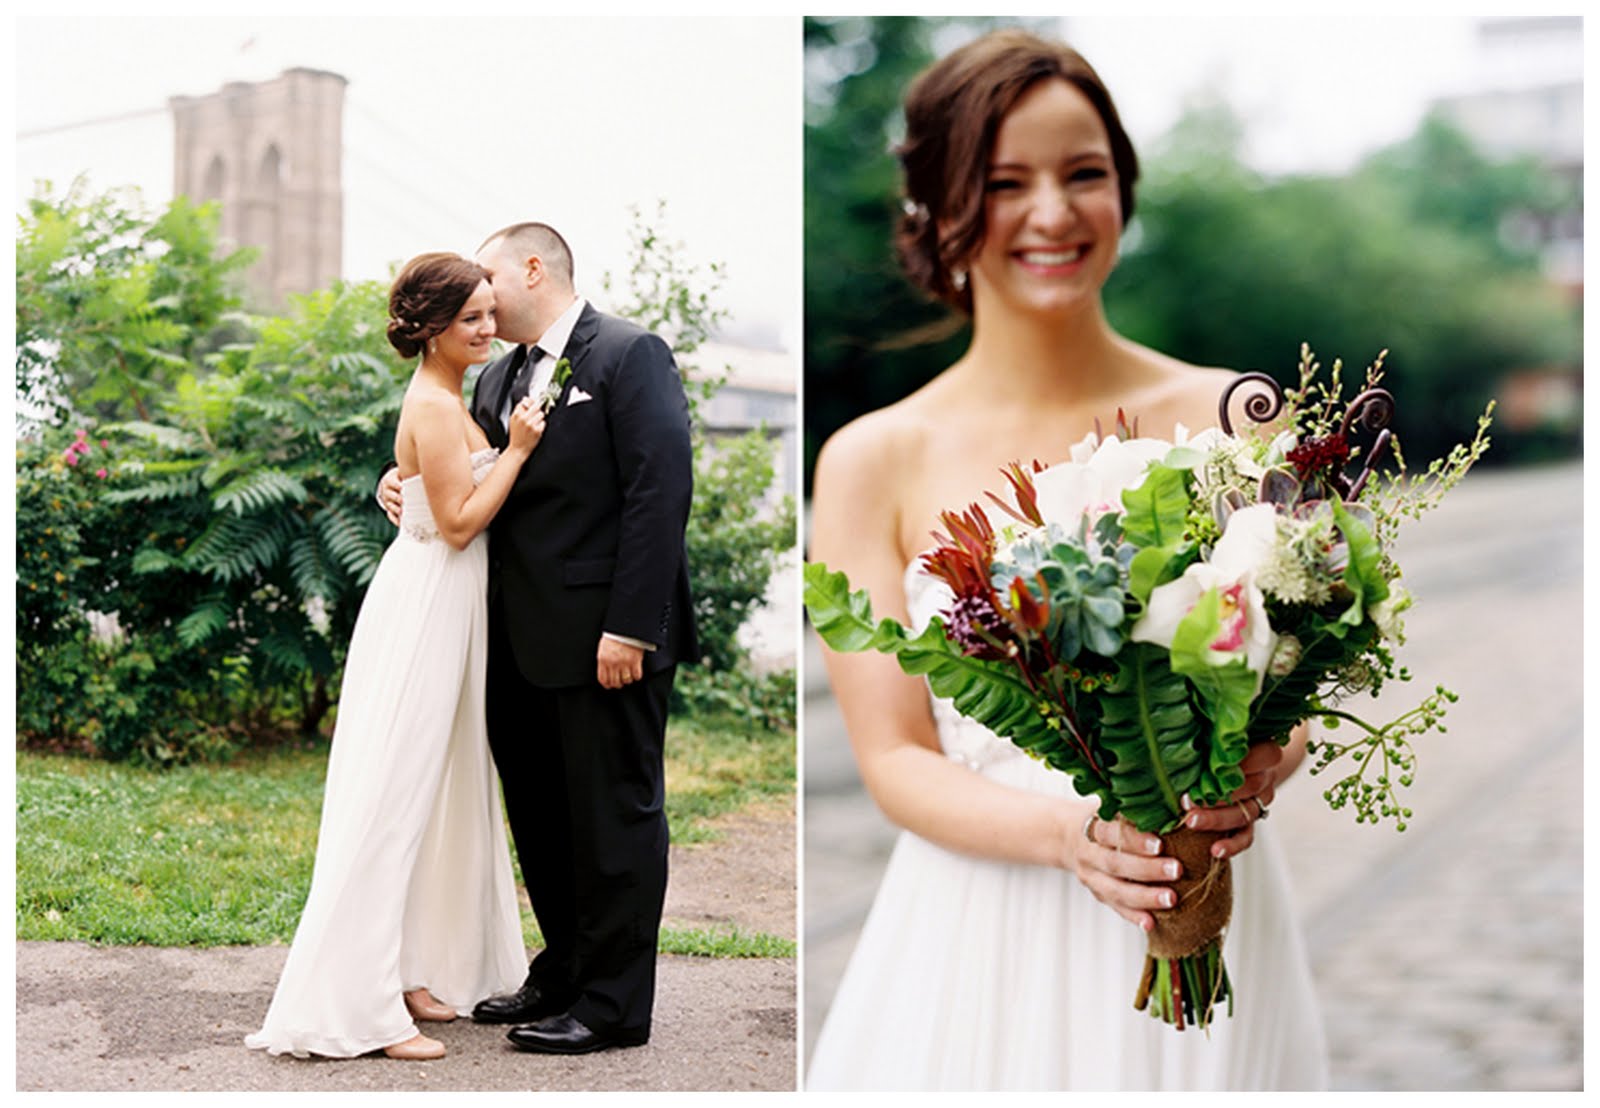 Autumn wedding pictured by